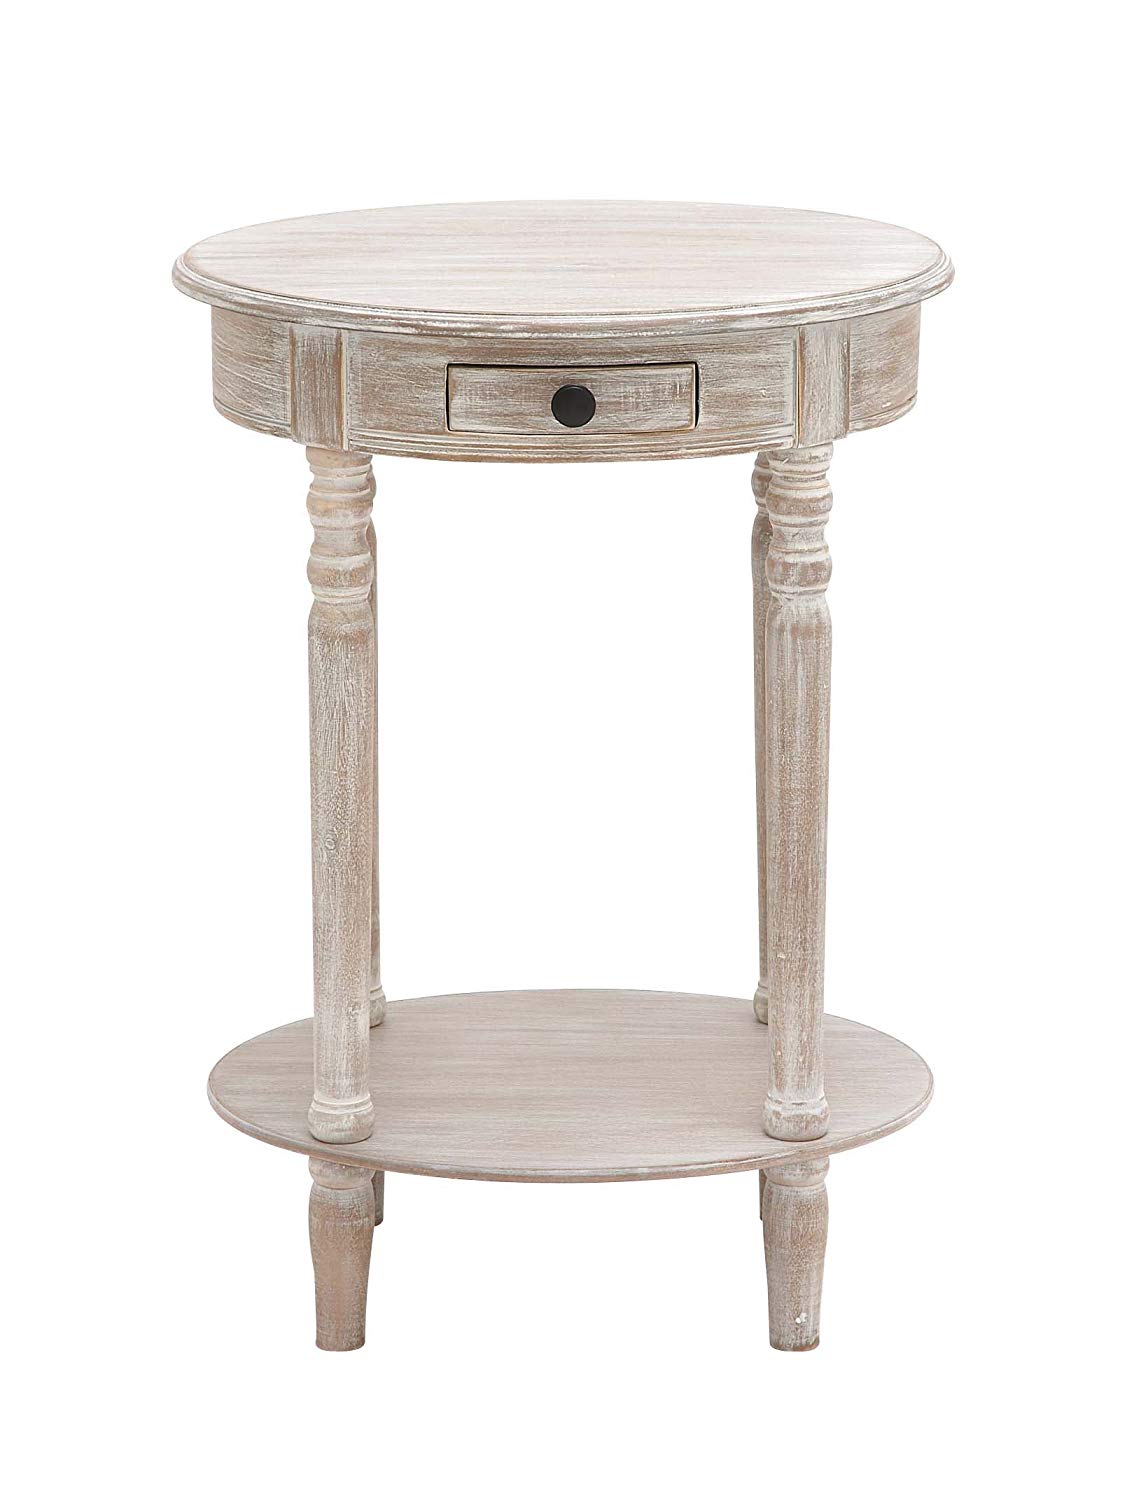 benzara the petite wood oval accent table mercer vintage oak inch off white kitchen dining square bar room essentials assembly instructions cute bedside tables outdoor umbrella